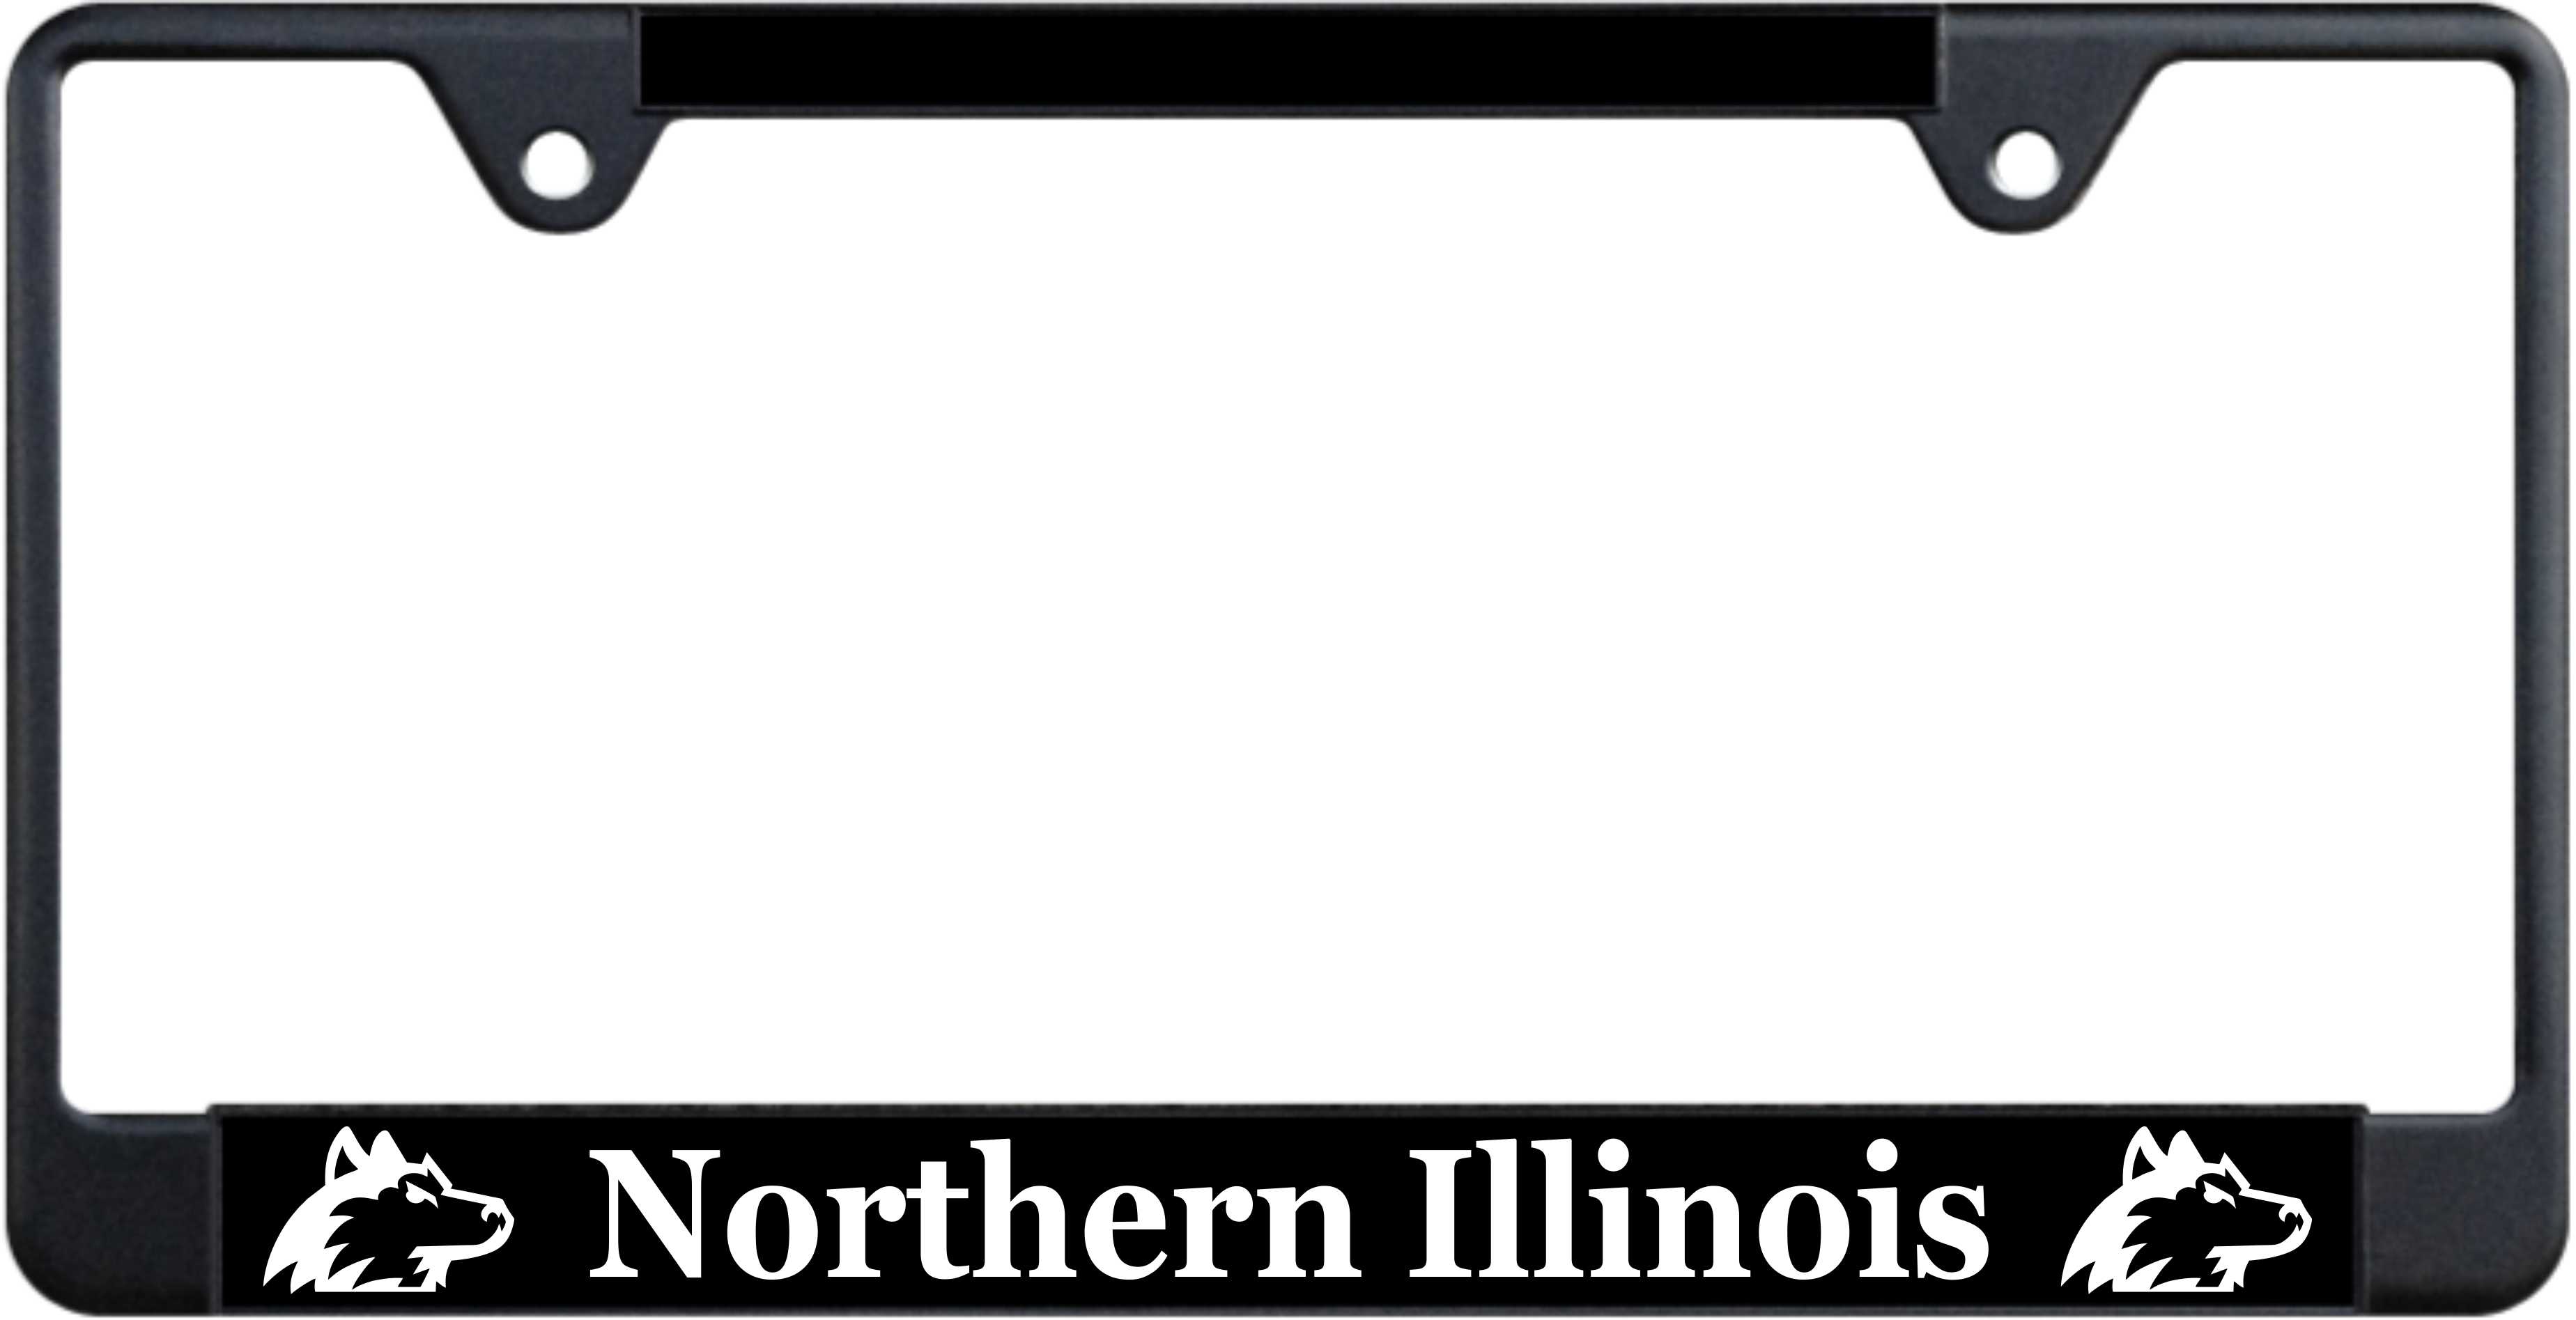 Northern Illinois License Plate Frame